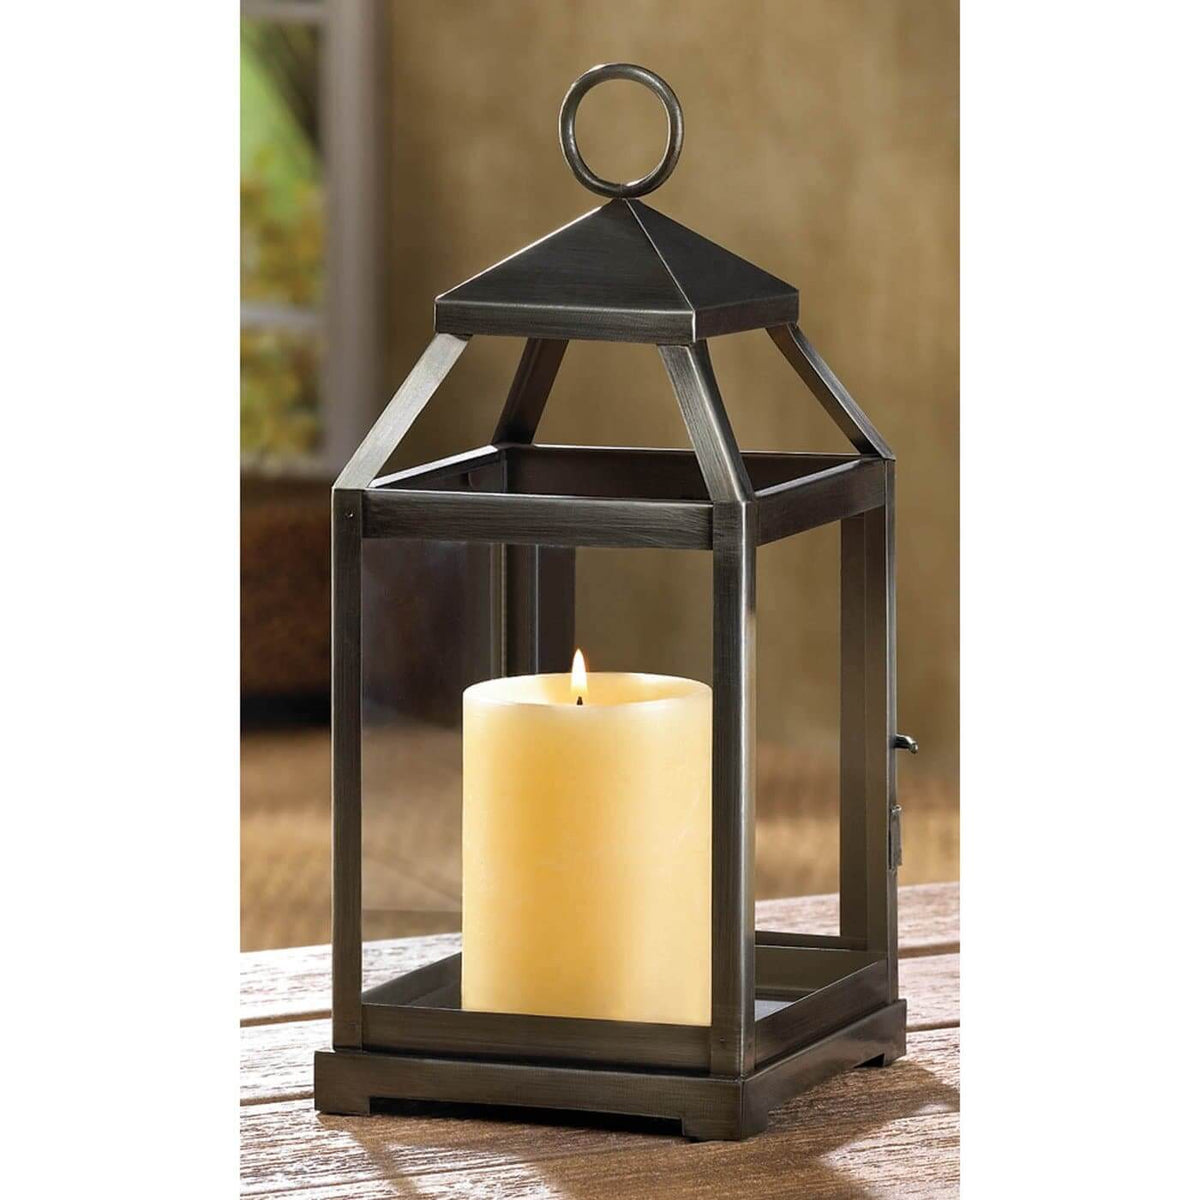 Rustic Silver Candle Lantern - The House of Awareness